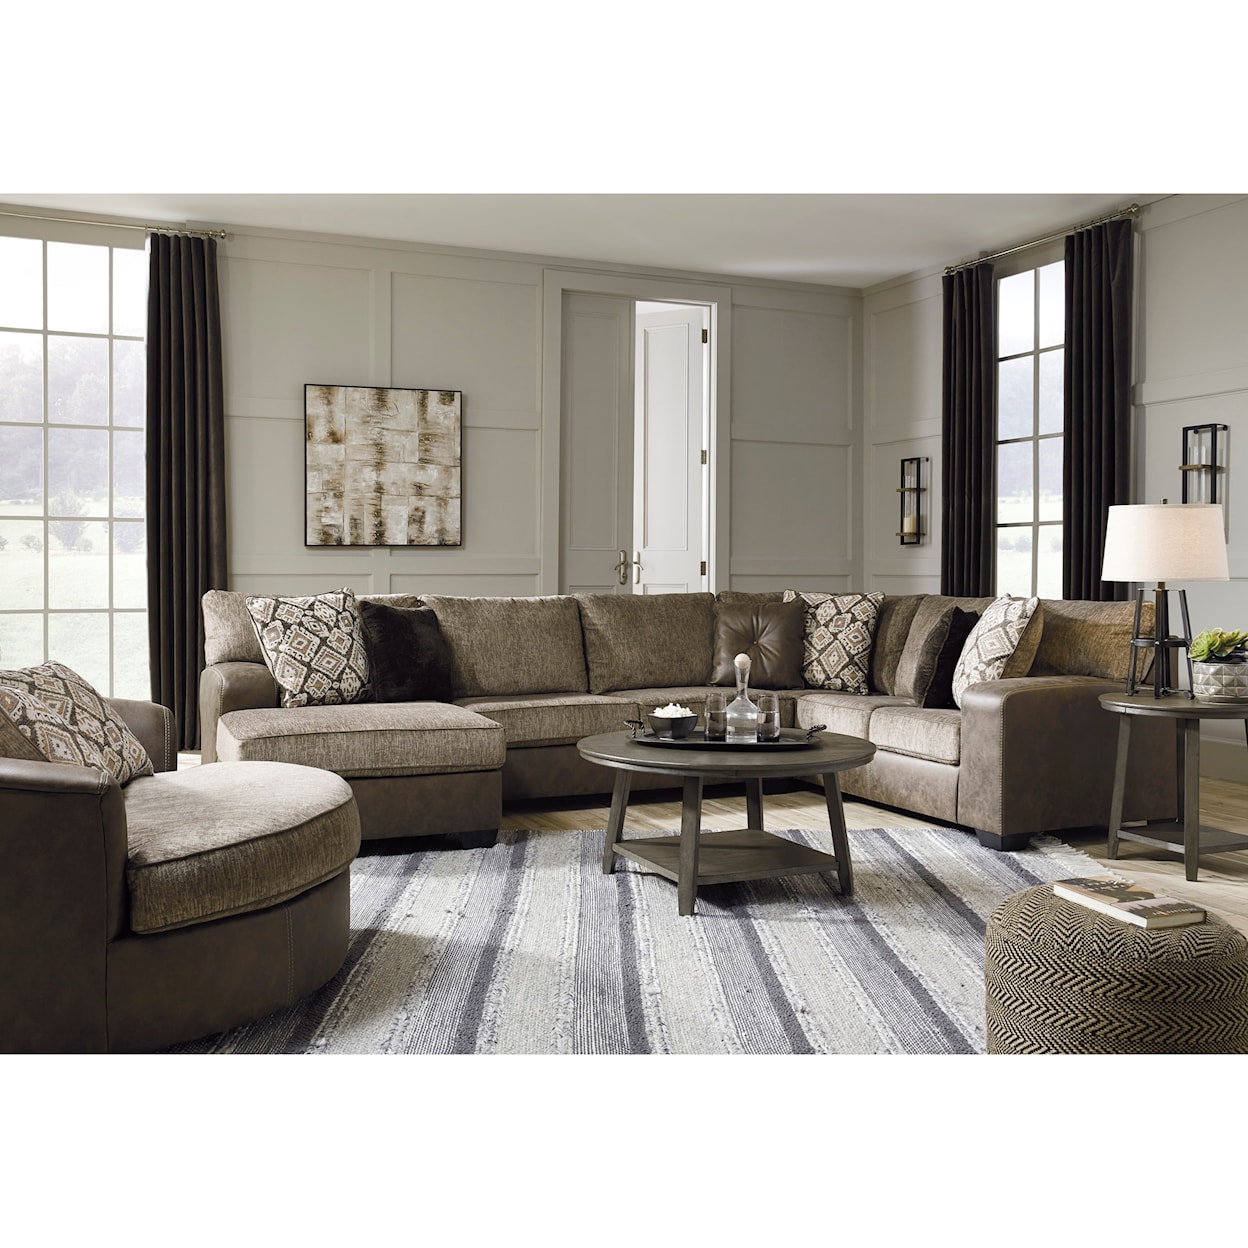 Ashley Furniture Benchcraft Abalone Living Room Group